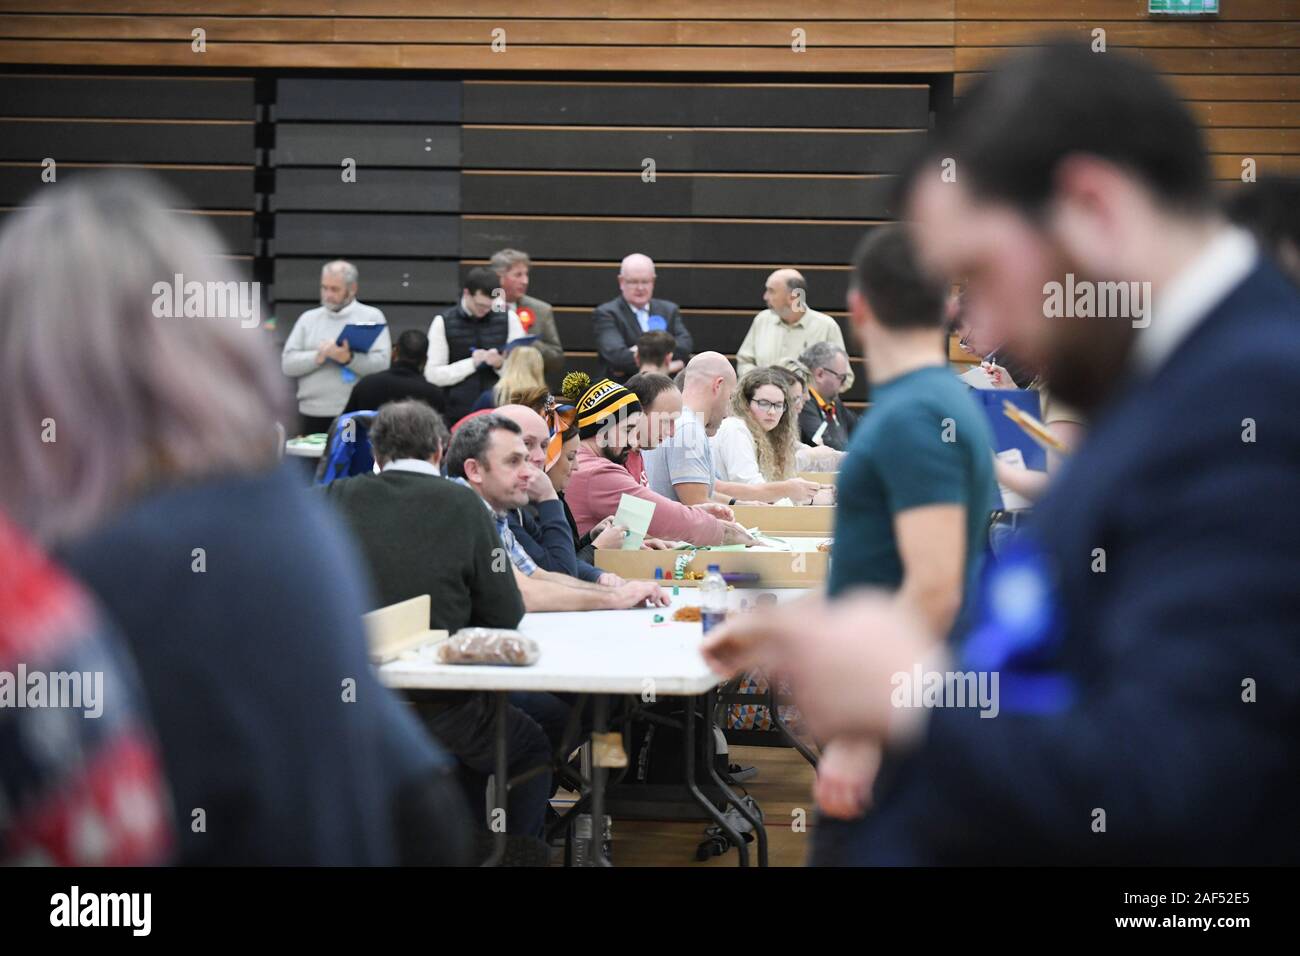 Swansea, Wales, UK. Thursday 12th December 2019 Votes are counted in Swansea, South Wales after polls close in the 2019 UK General election. Staff will process votes from Swansea East, Swansea West and the very closely fought Gower. Credit : Robert Melen/Alamy Live News. Stock Photo